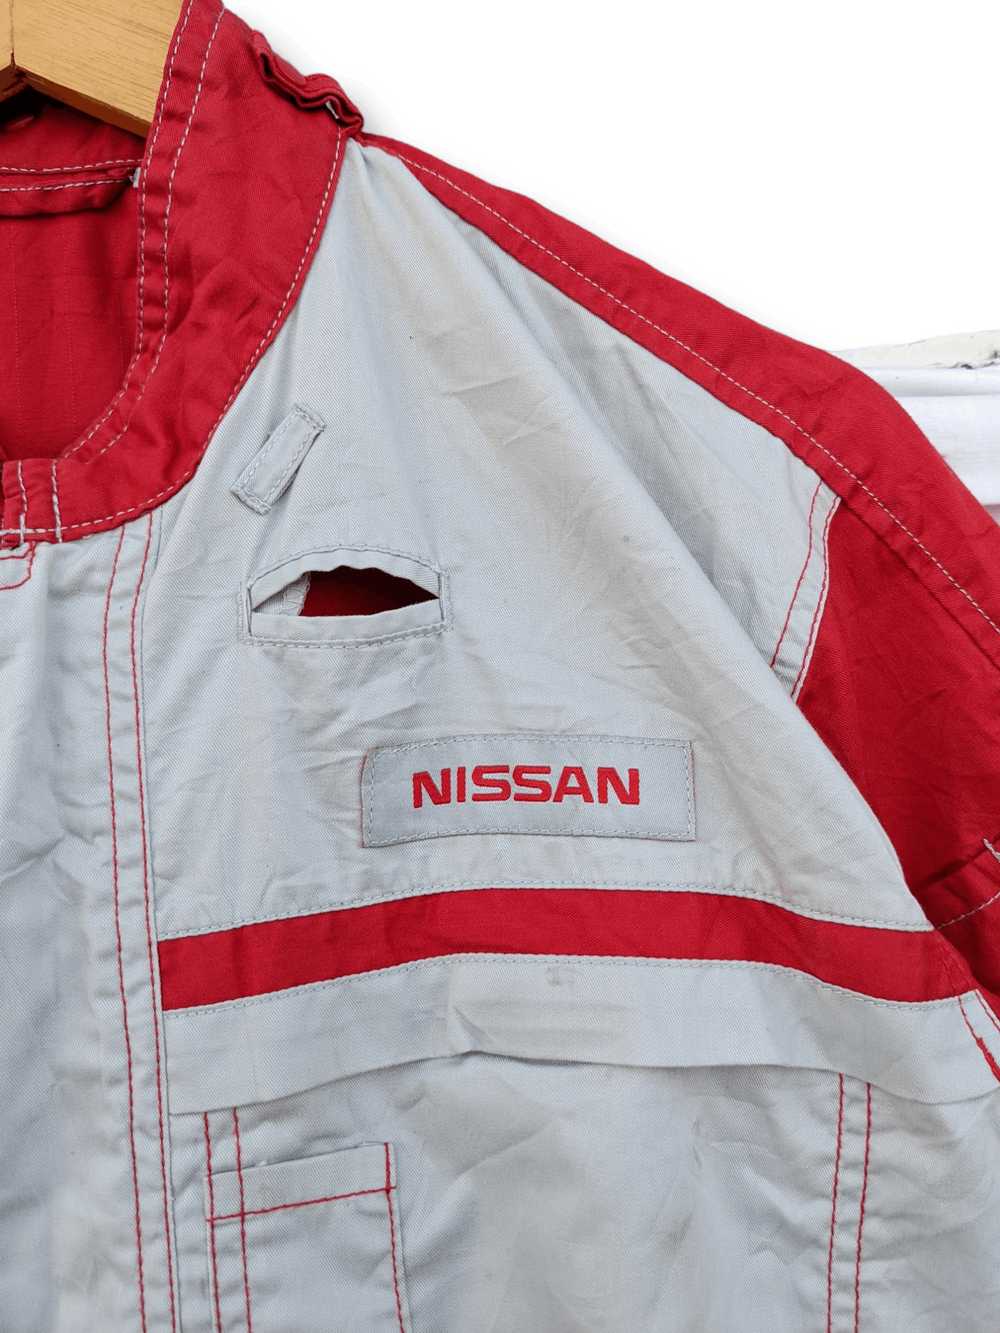 Gear For Sports × Racing Nissan Racing Worker Ove… - image 5